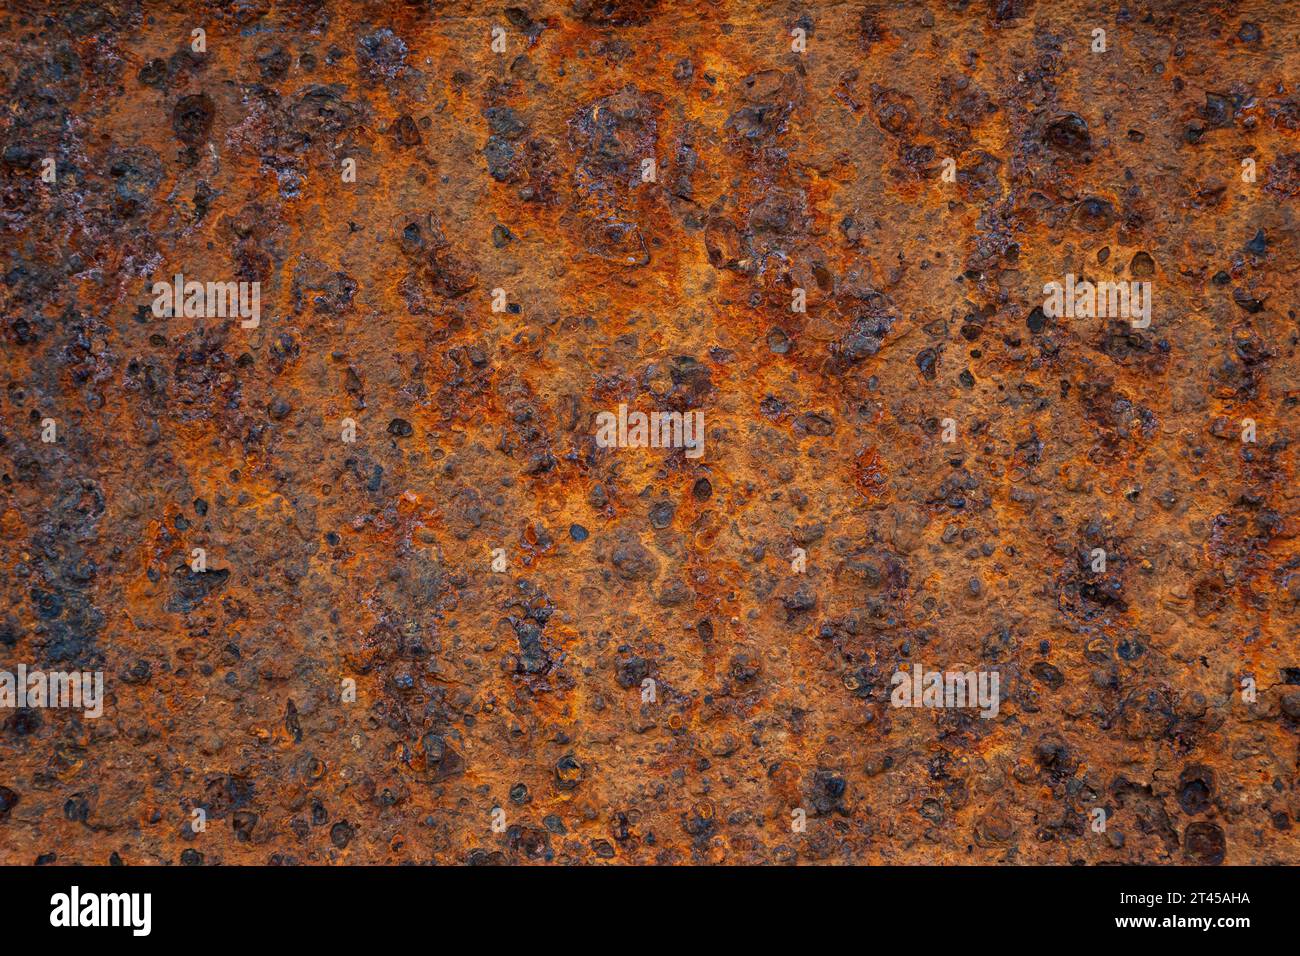 Close-up of an old, weathered and rusty metal surface. High quality and resolution full frame textured grunge rust background. Stock Photo